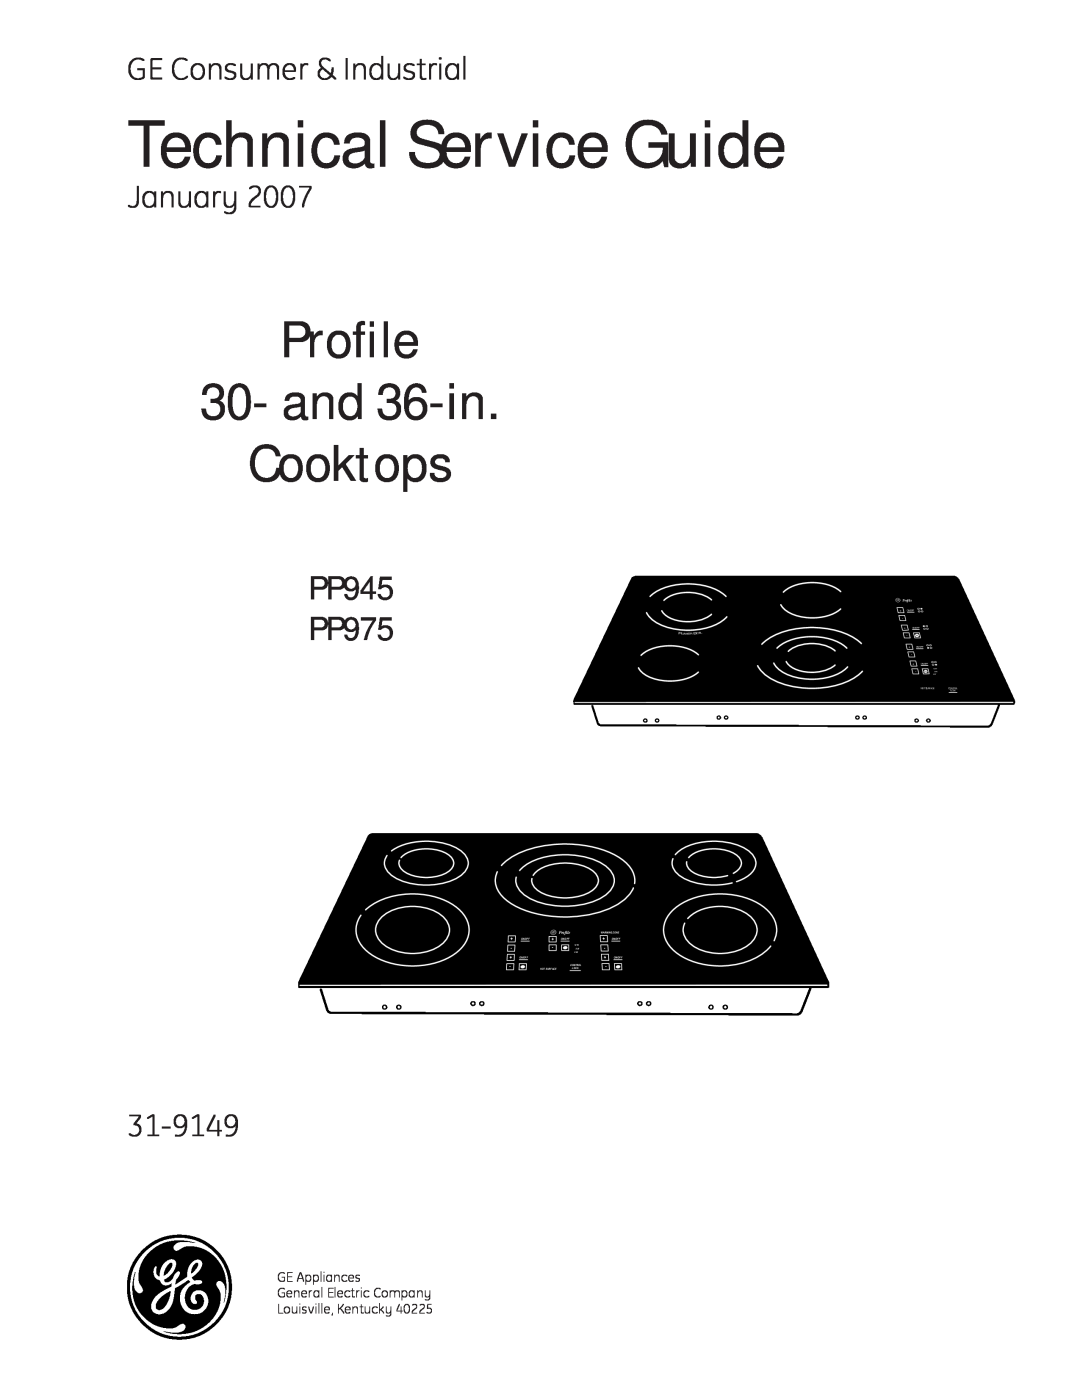 GE manual Technical Service Guide, Proﬁle 30- and 36-in Cooktops, GE Consumer & Industrial, January, PP945 PP975, + - + 